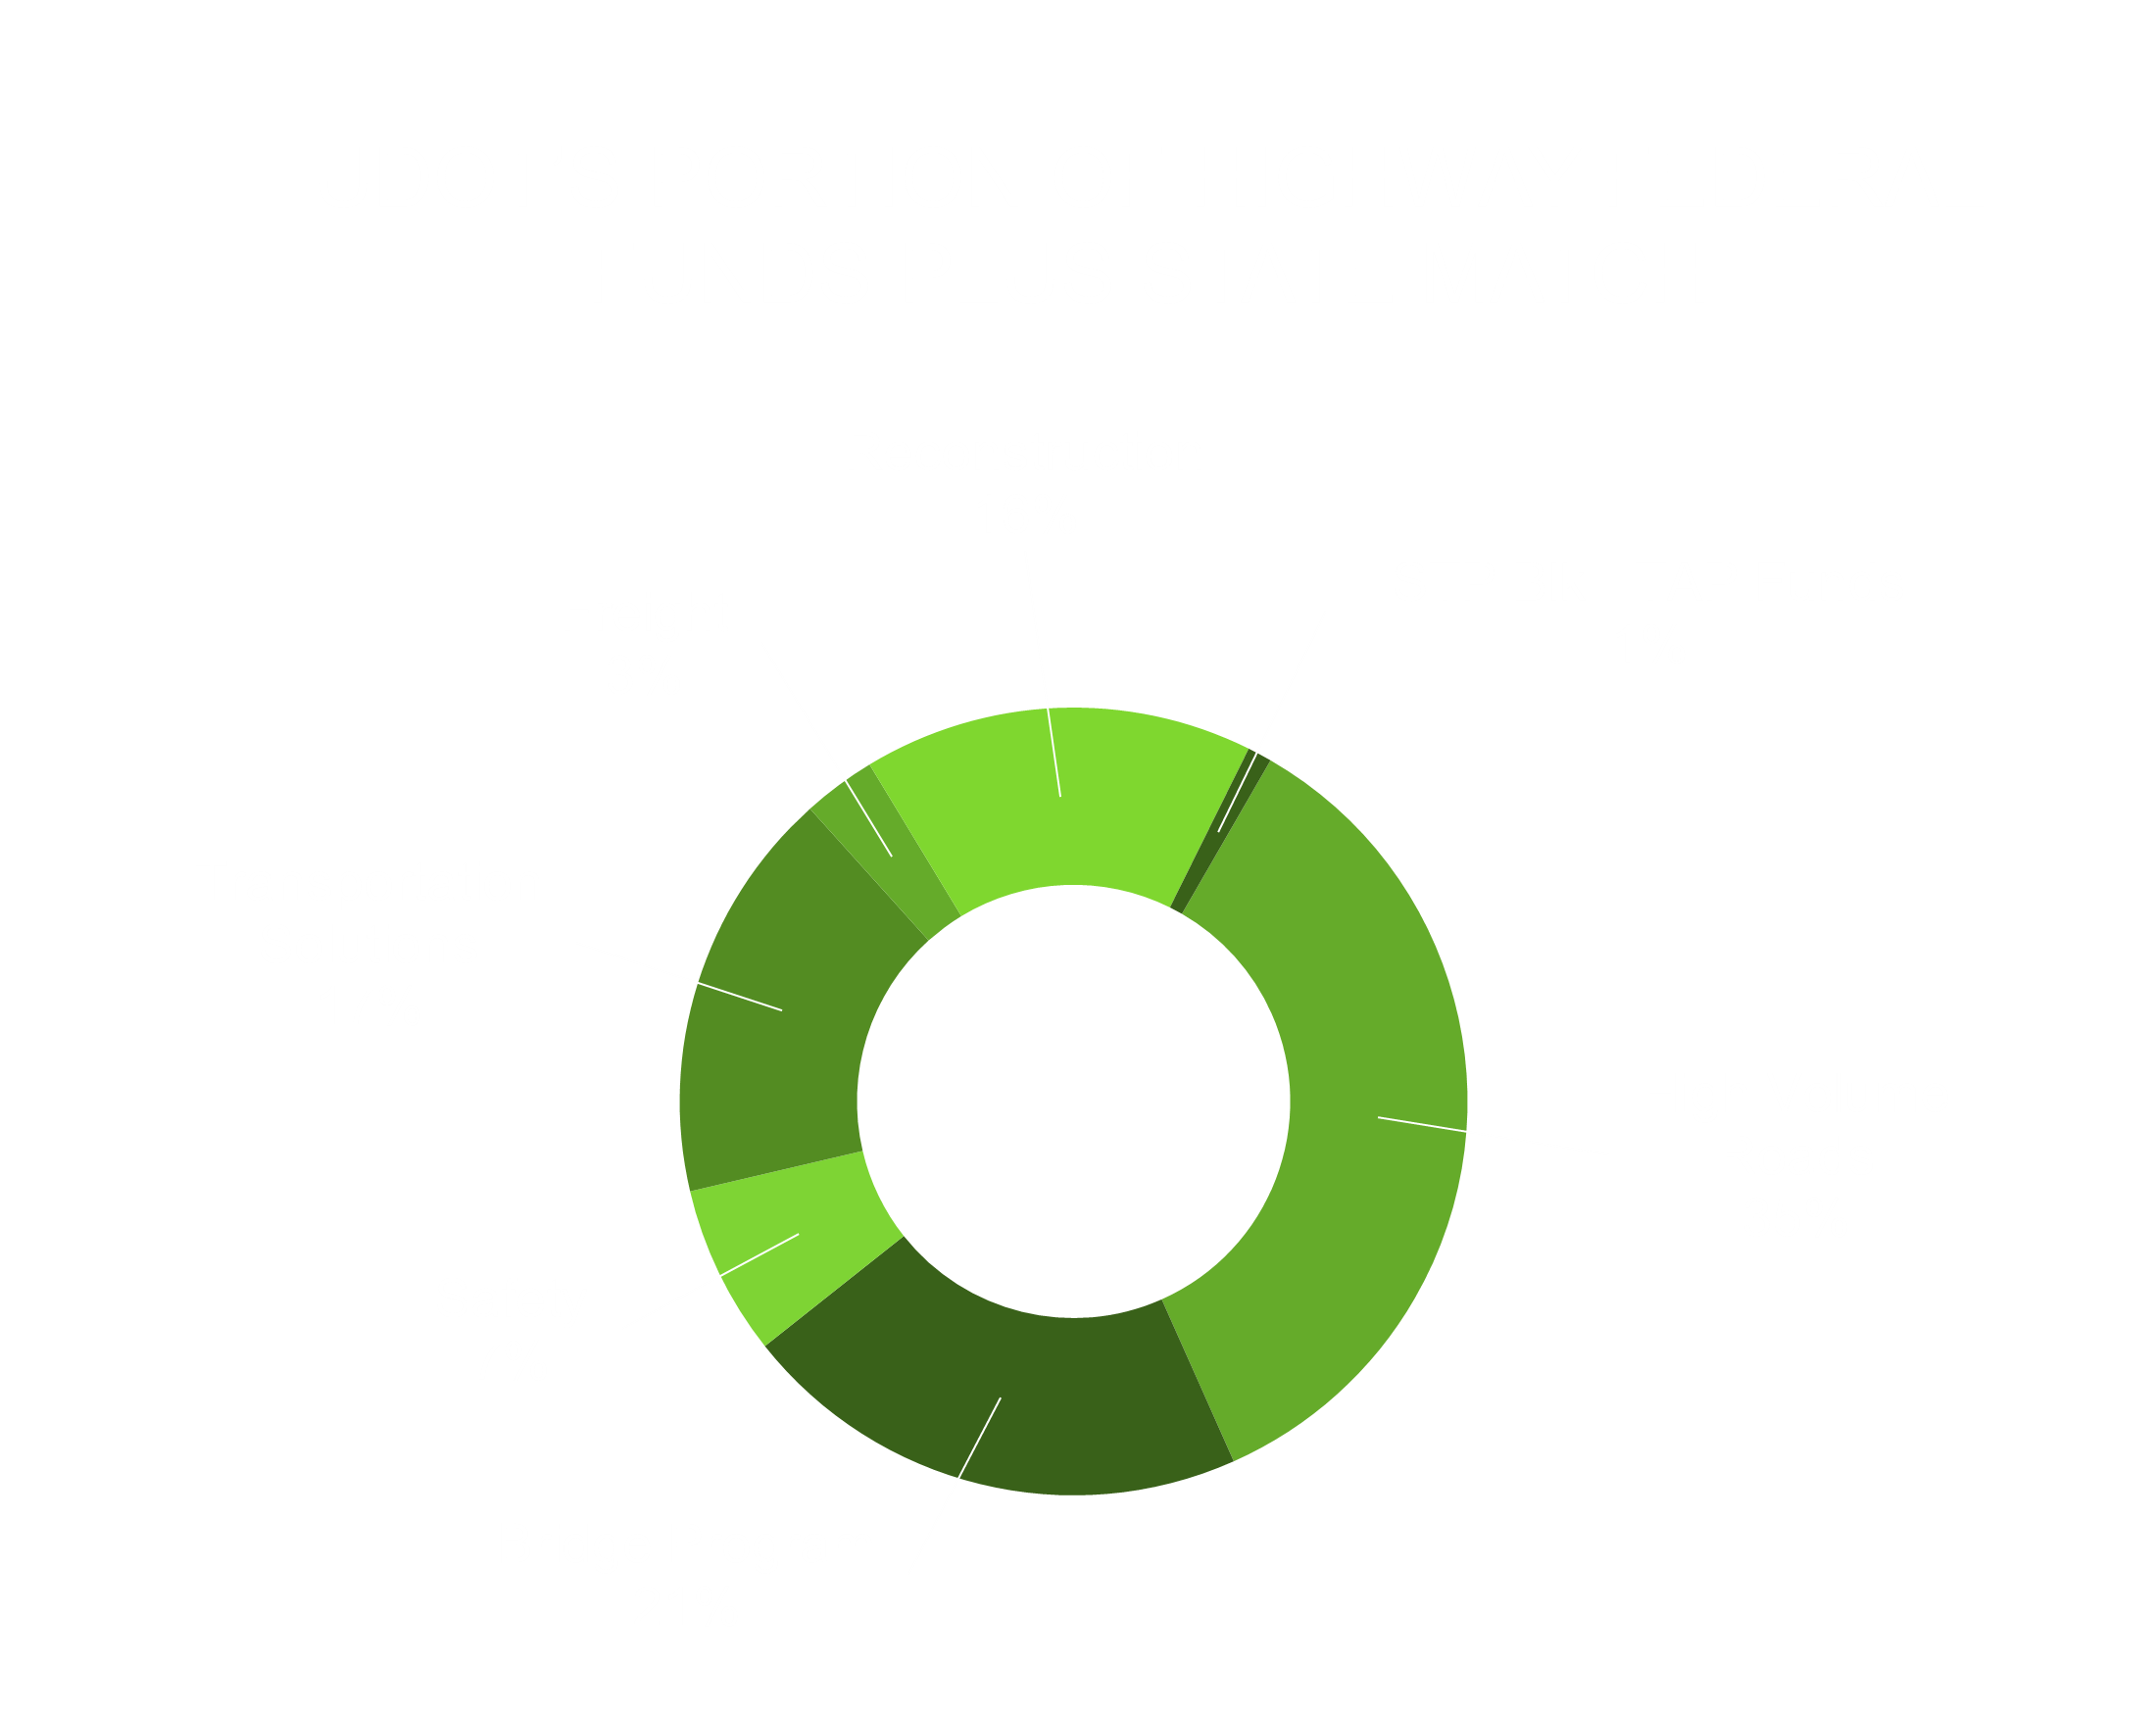 UDOT's Portion of Highway Federal Funds Plus State Match chart shows 35% High Volume Roads, 17% Transportation Solutions, 21% for Bridges, 7% Safety, 3% Freight, 16% Reconstruction, and 1% for STP Blk - TAP Funds.